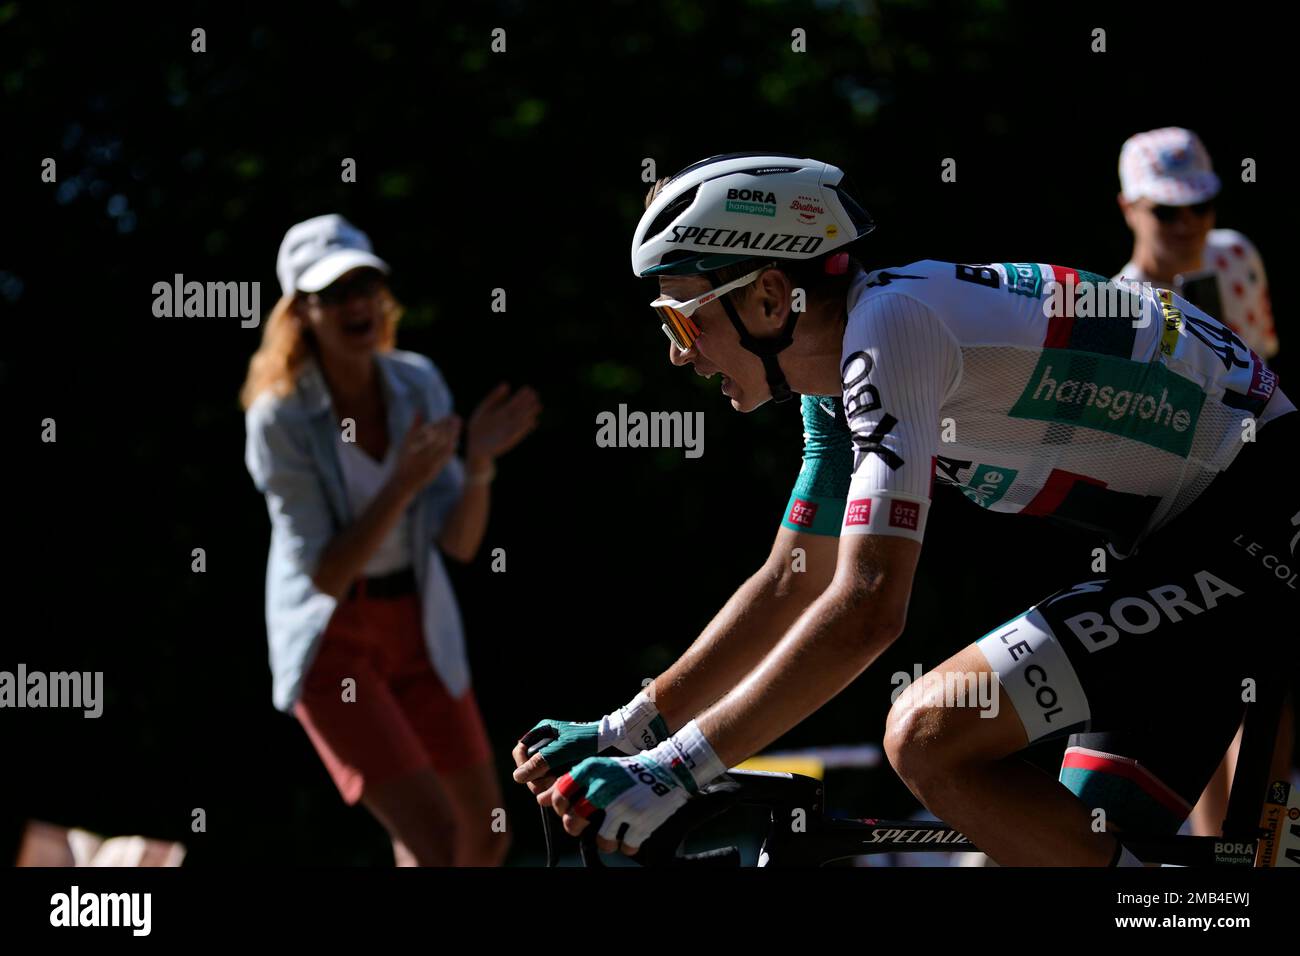 Germany's Lennard Kaemna clims La Super Planche des Belles Fille during the  seventh stage of the Tour de France cycling race over 176.5 kilometers  (109.7 miles) with start in Tomblaine and finish